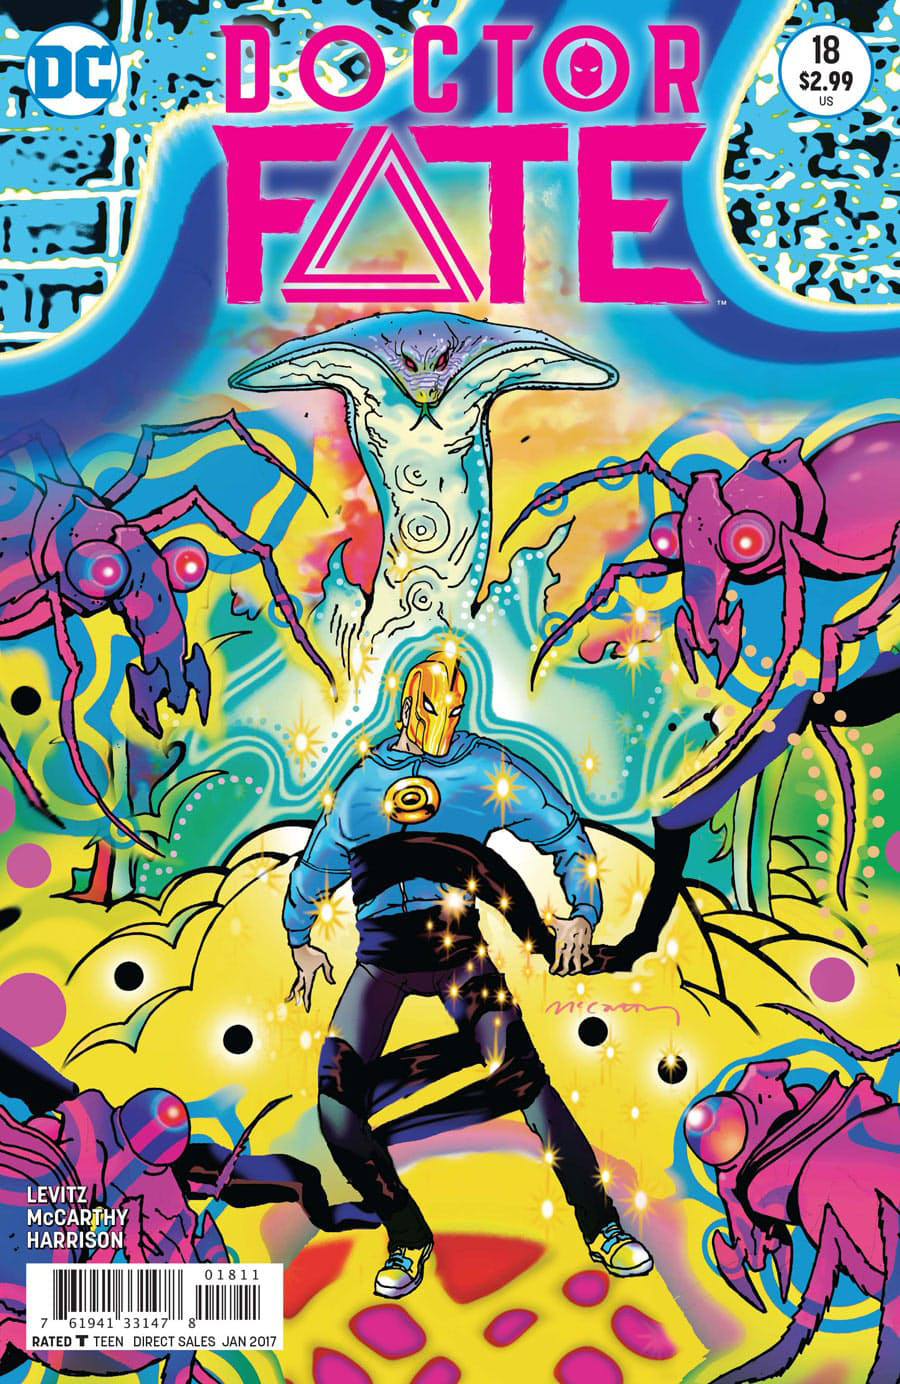 DOCTOR FATE #18